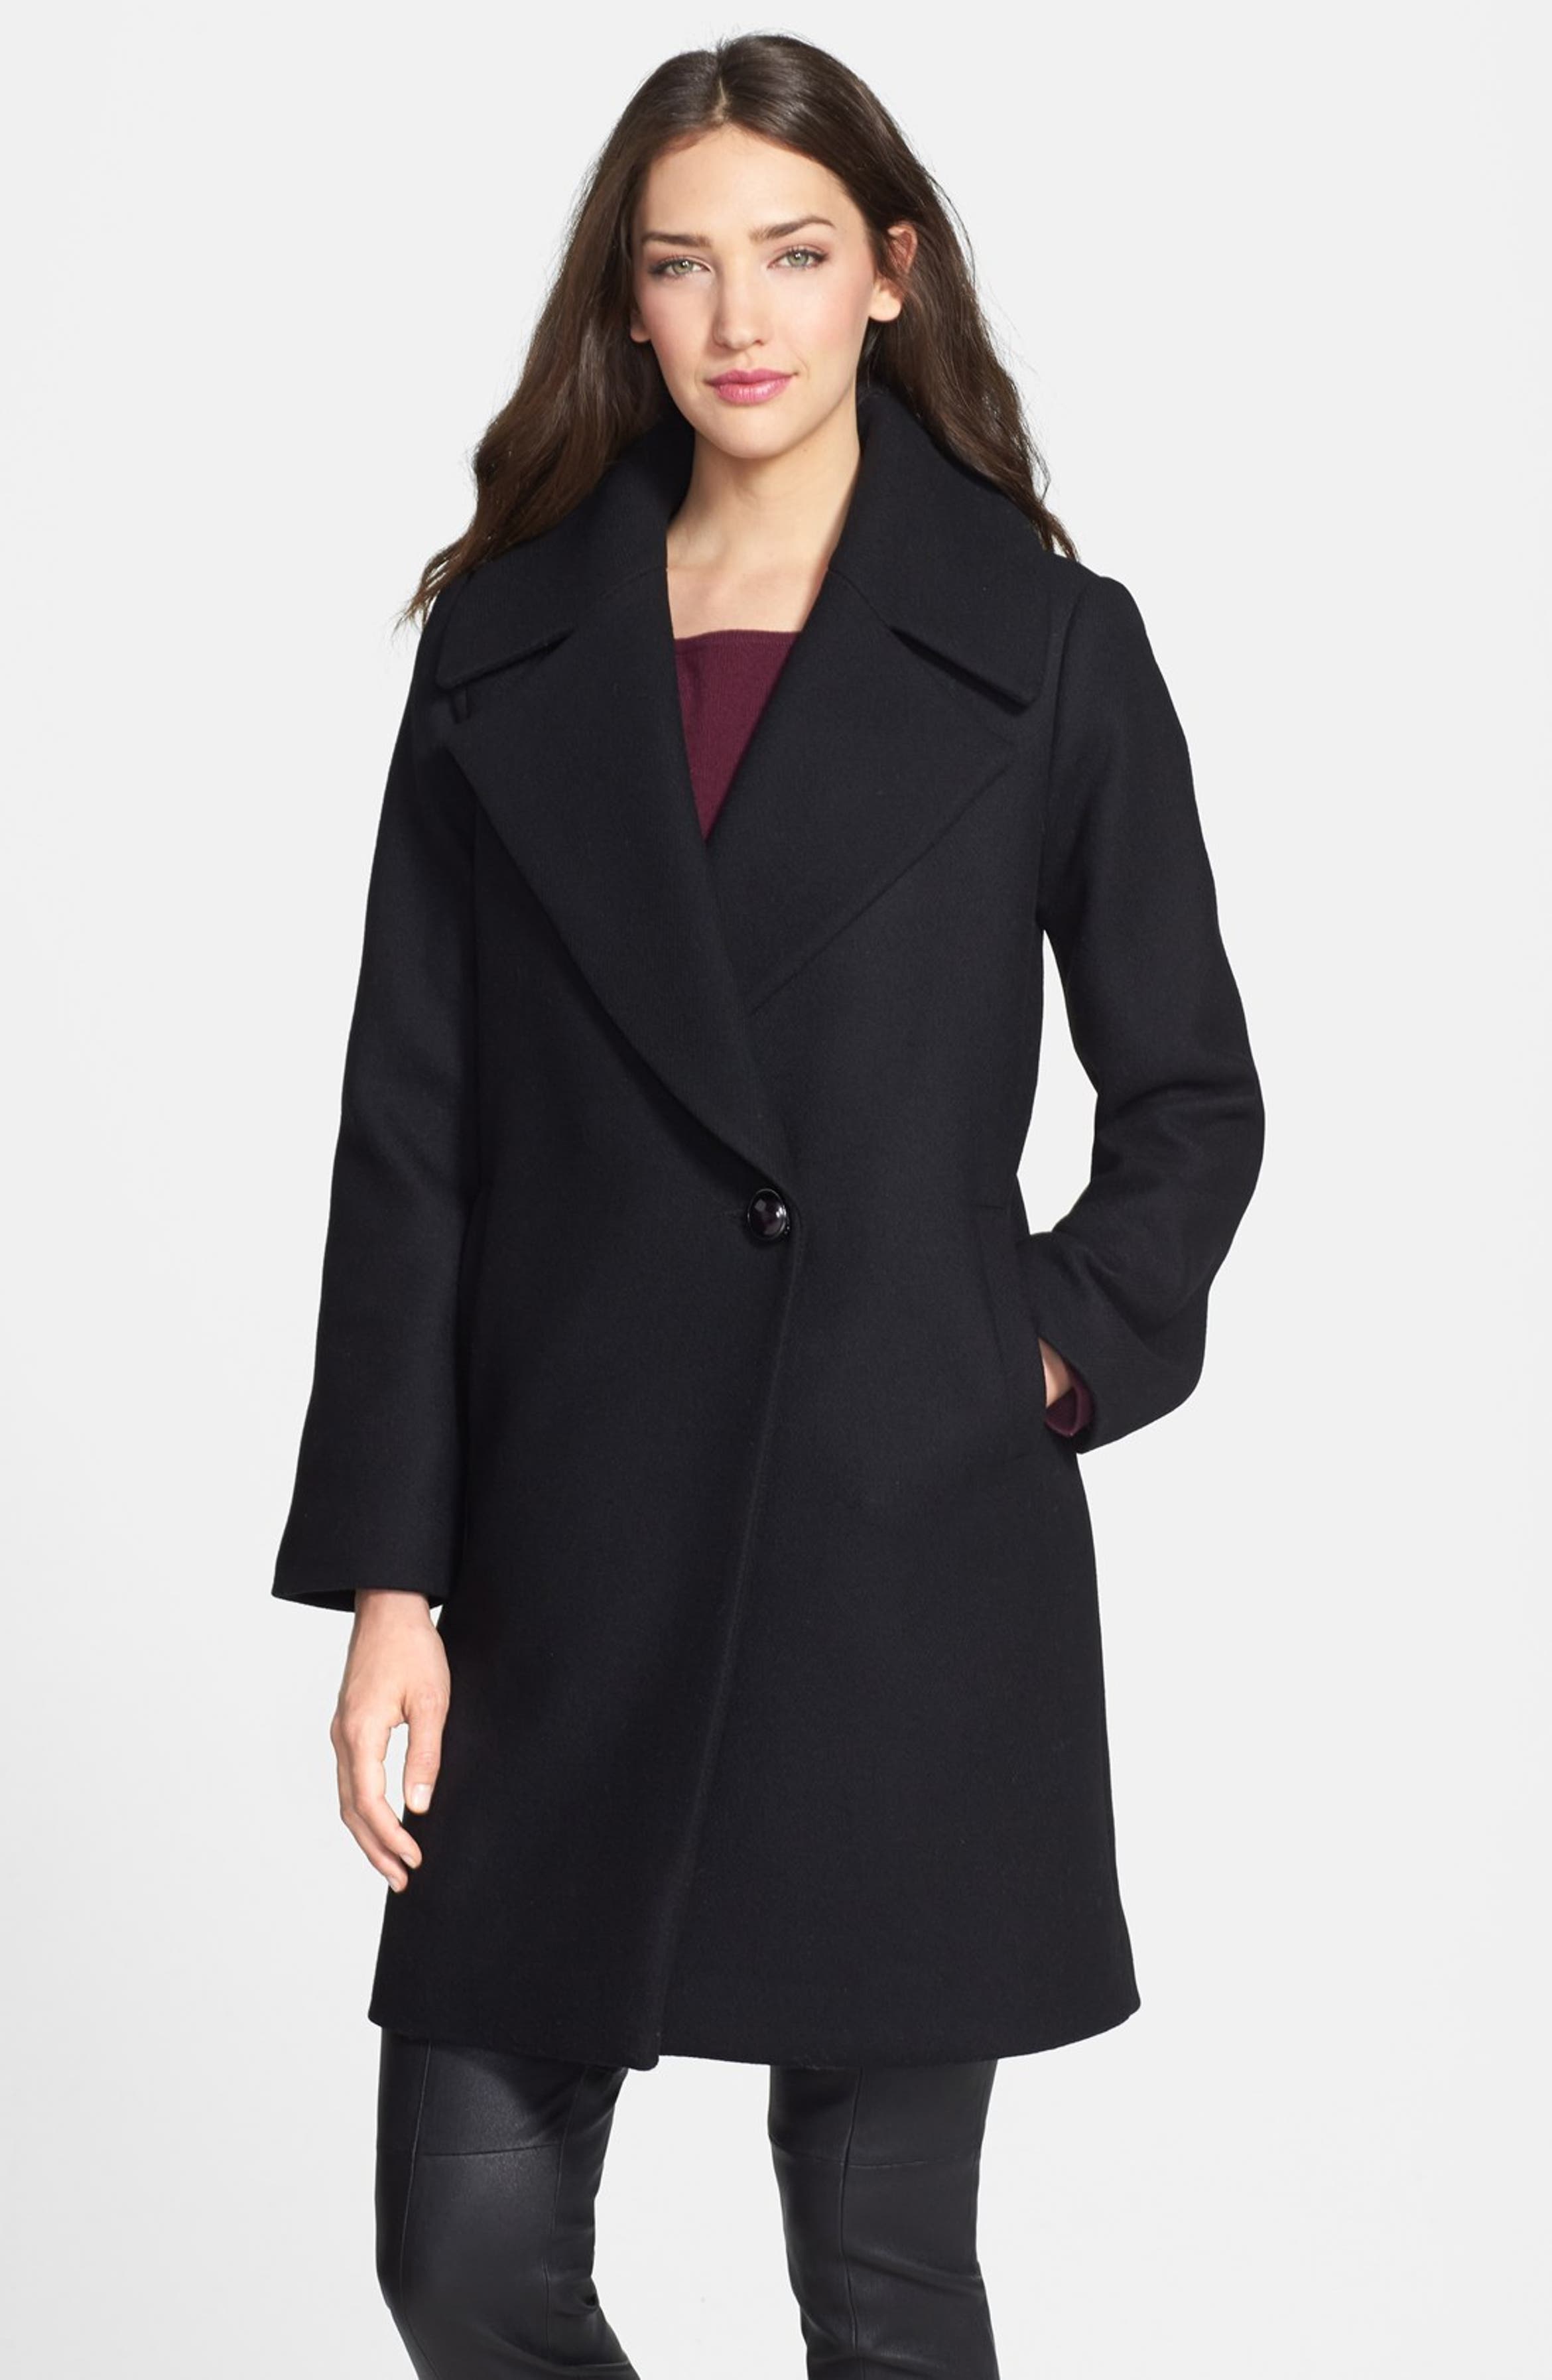 Trina Turk 'Claire' Wool Blend Coat | Nordstrom